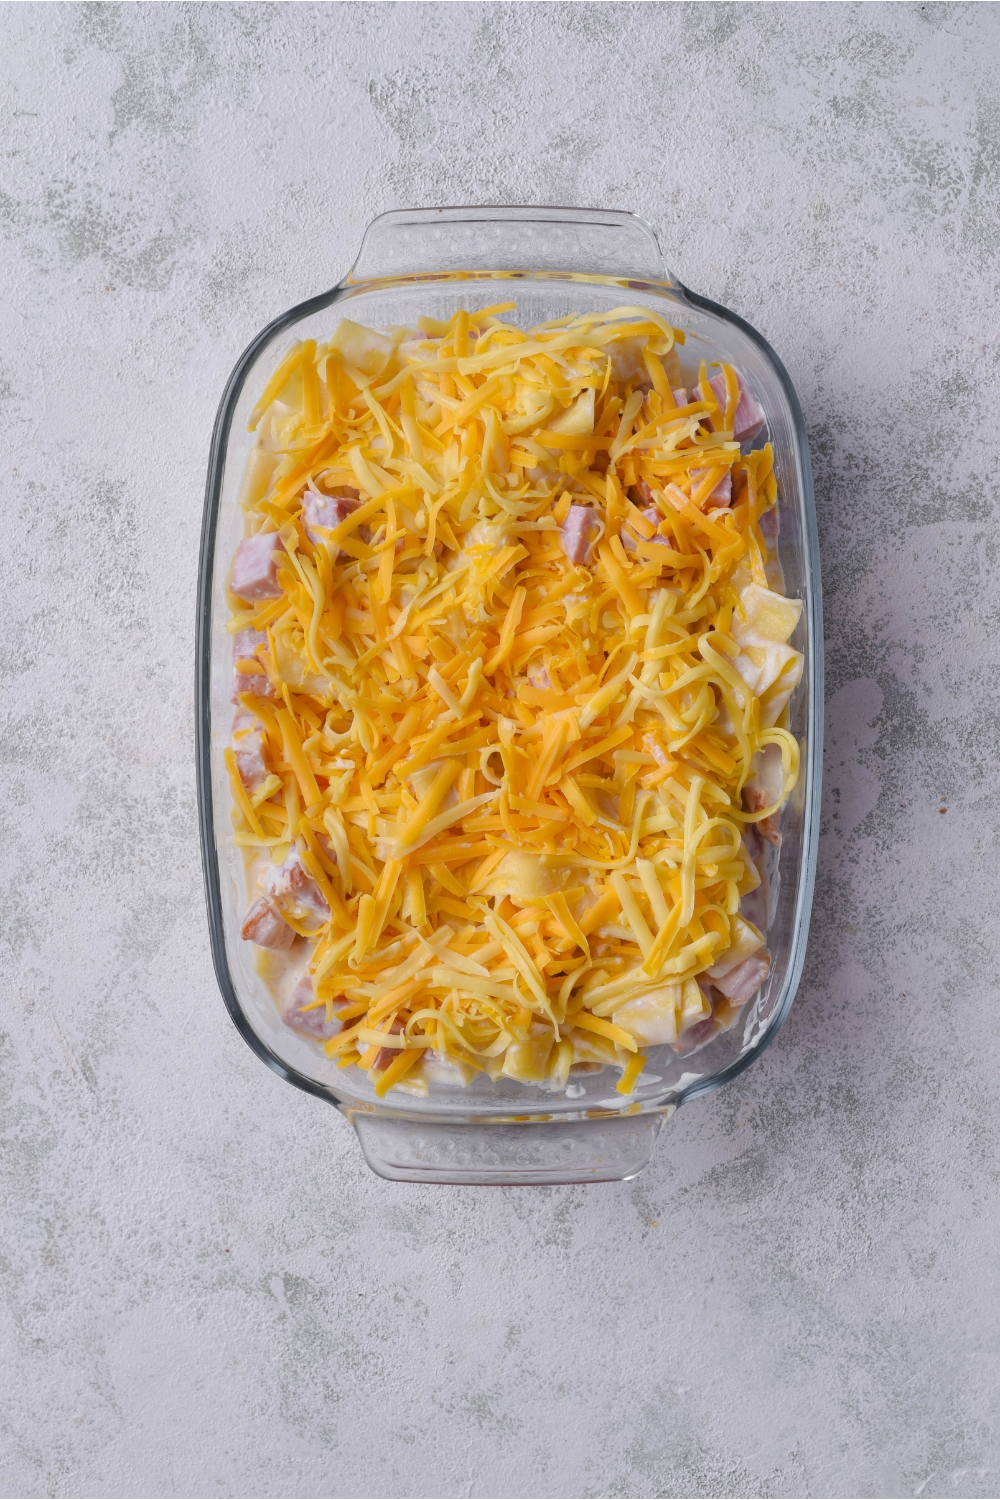 A baking dish filled with ham and noodle casserole covered in a layer of shredded cheese.